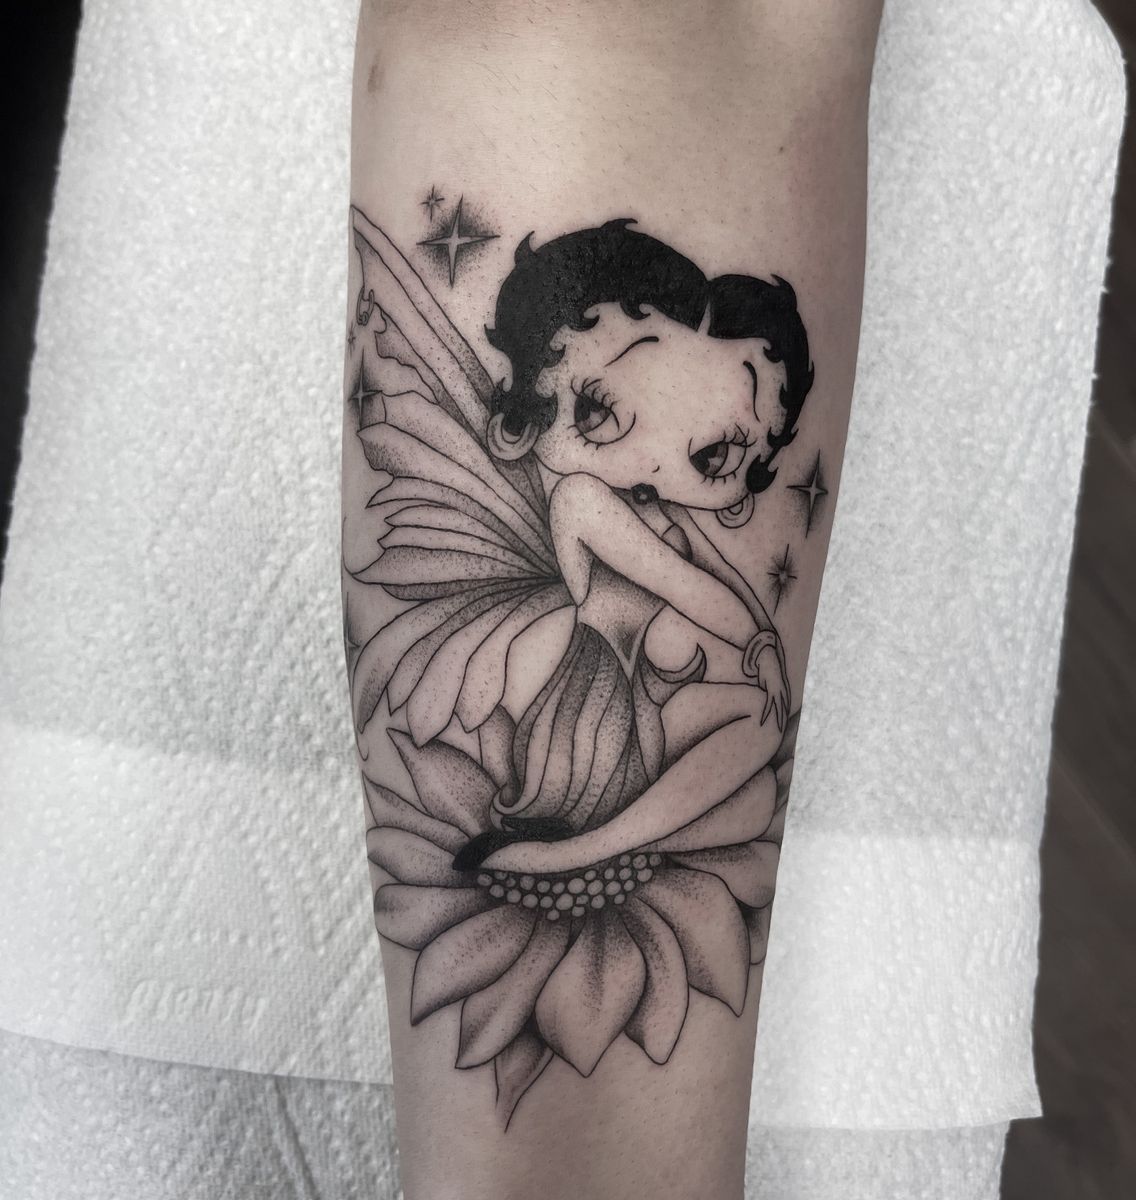 barbara creighton recommends betty boop tattoo pic